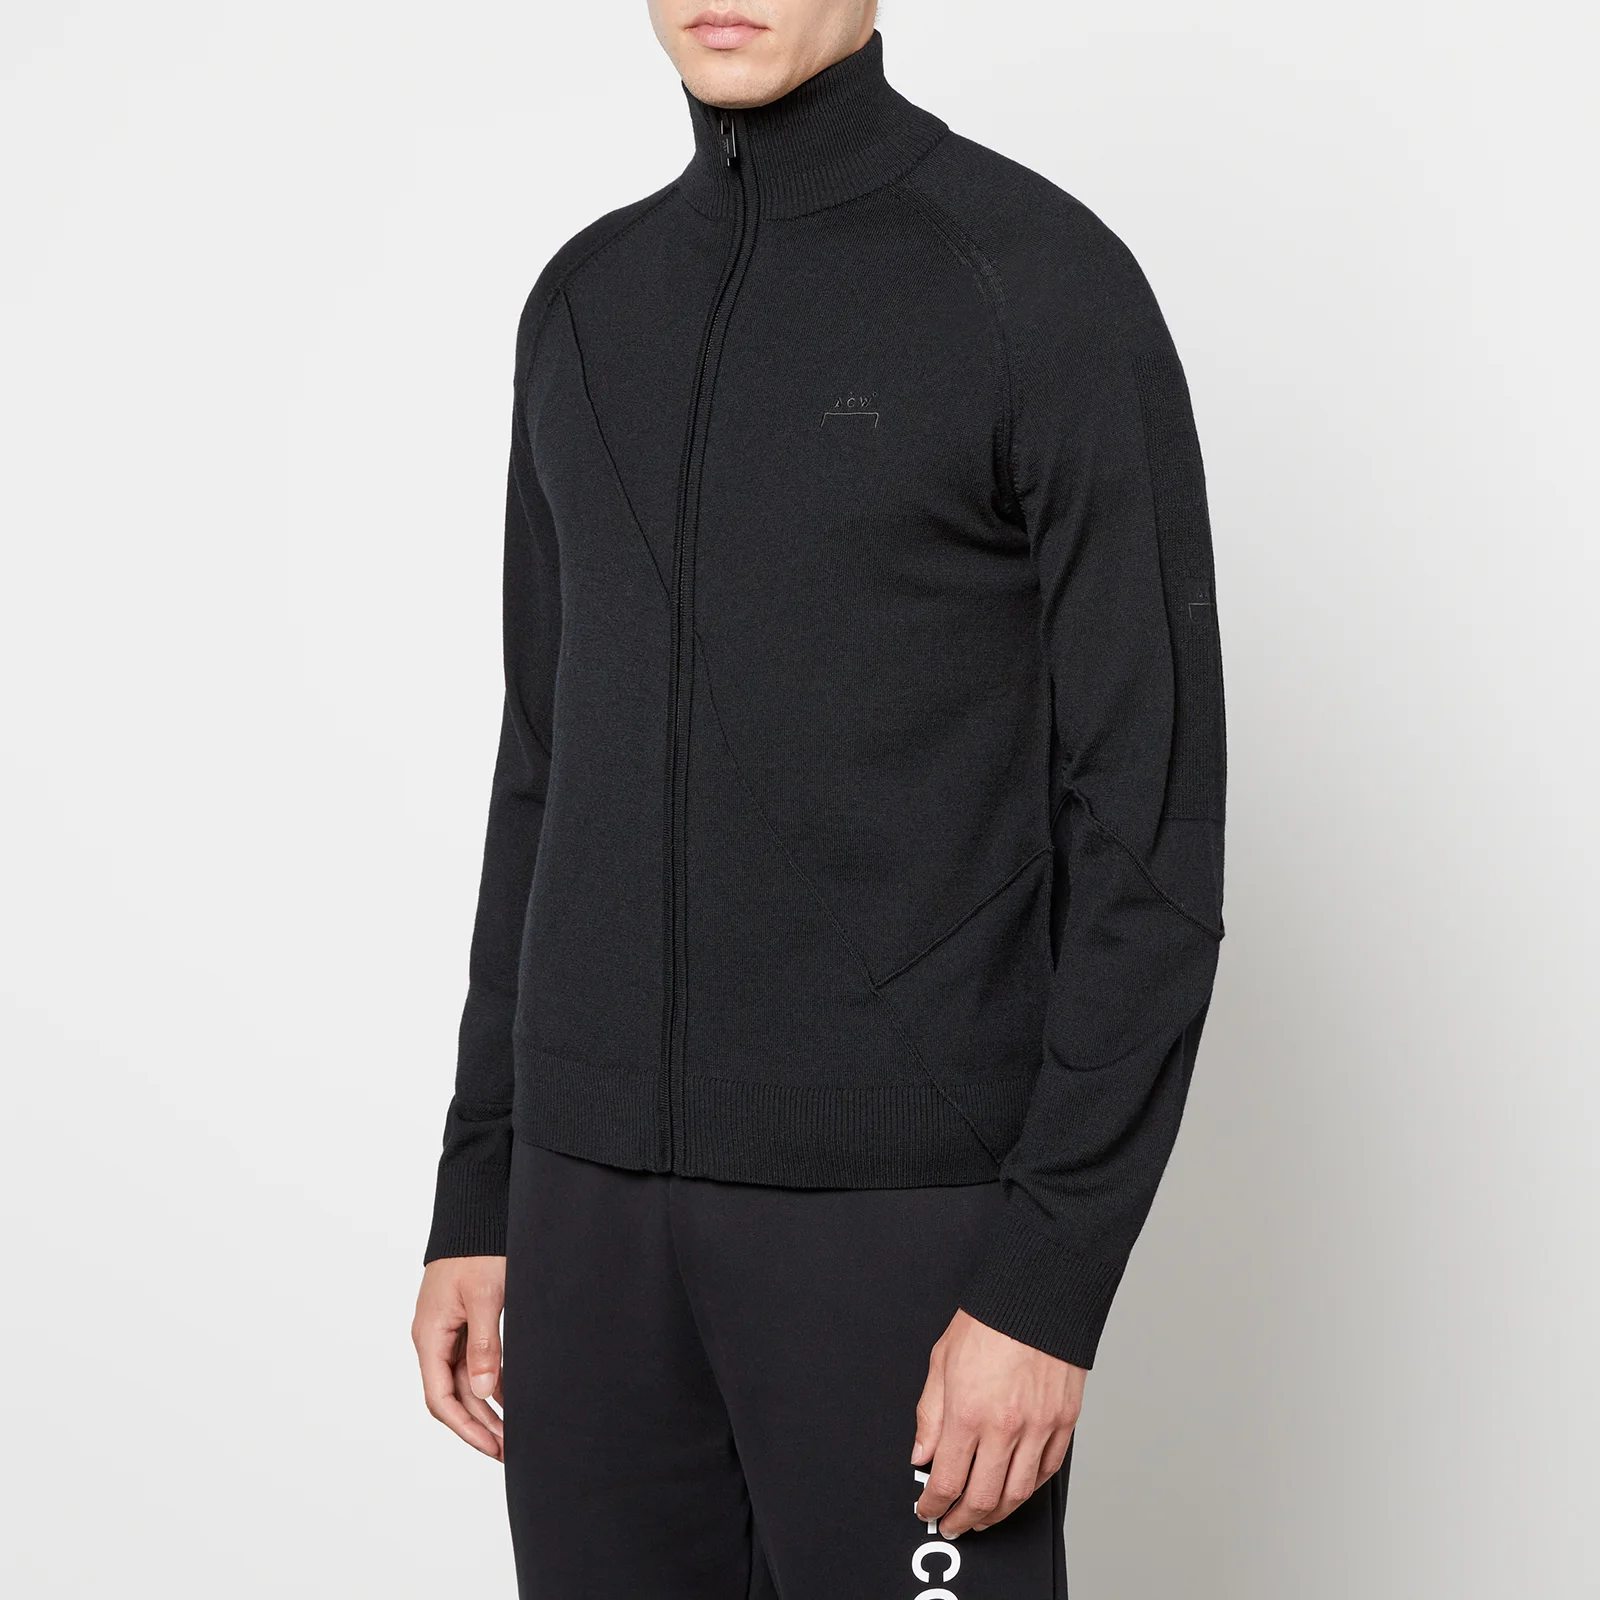 A-COLD-WALL* Wool-Blend Zip-Up Jumper Image 1